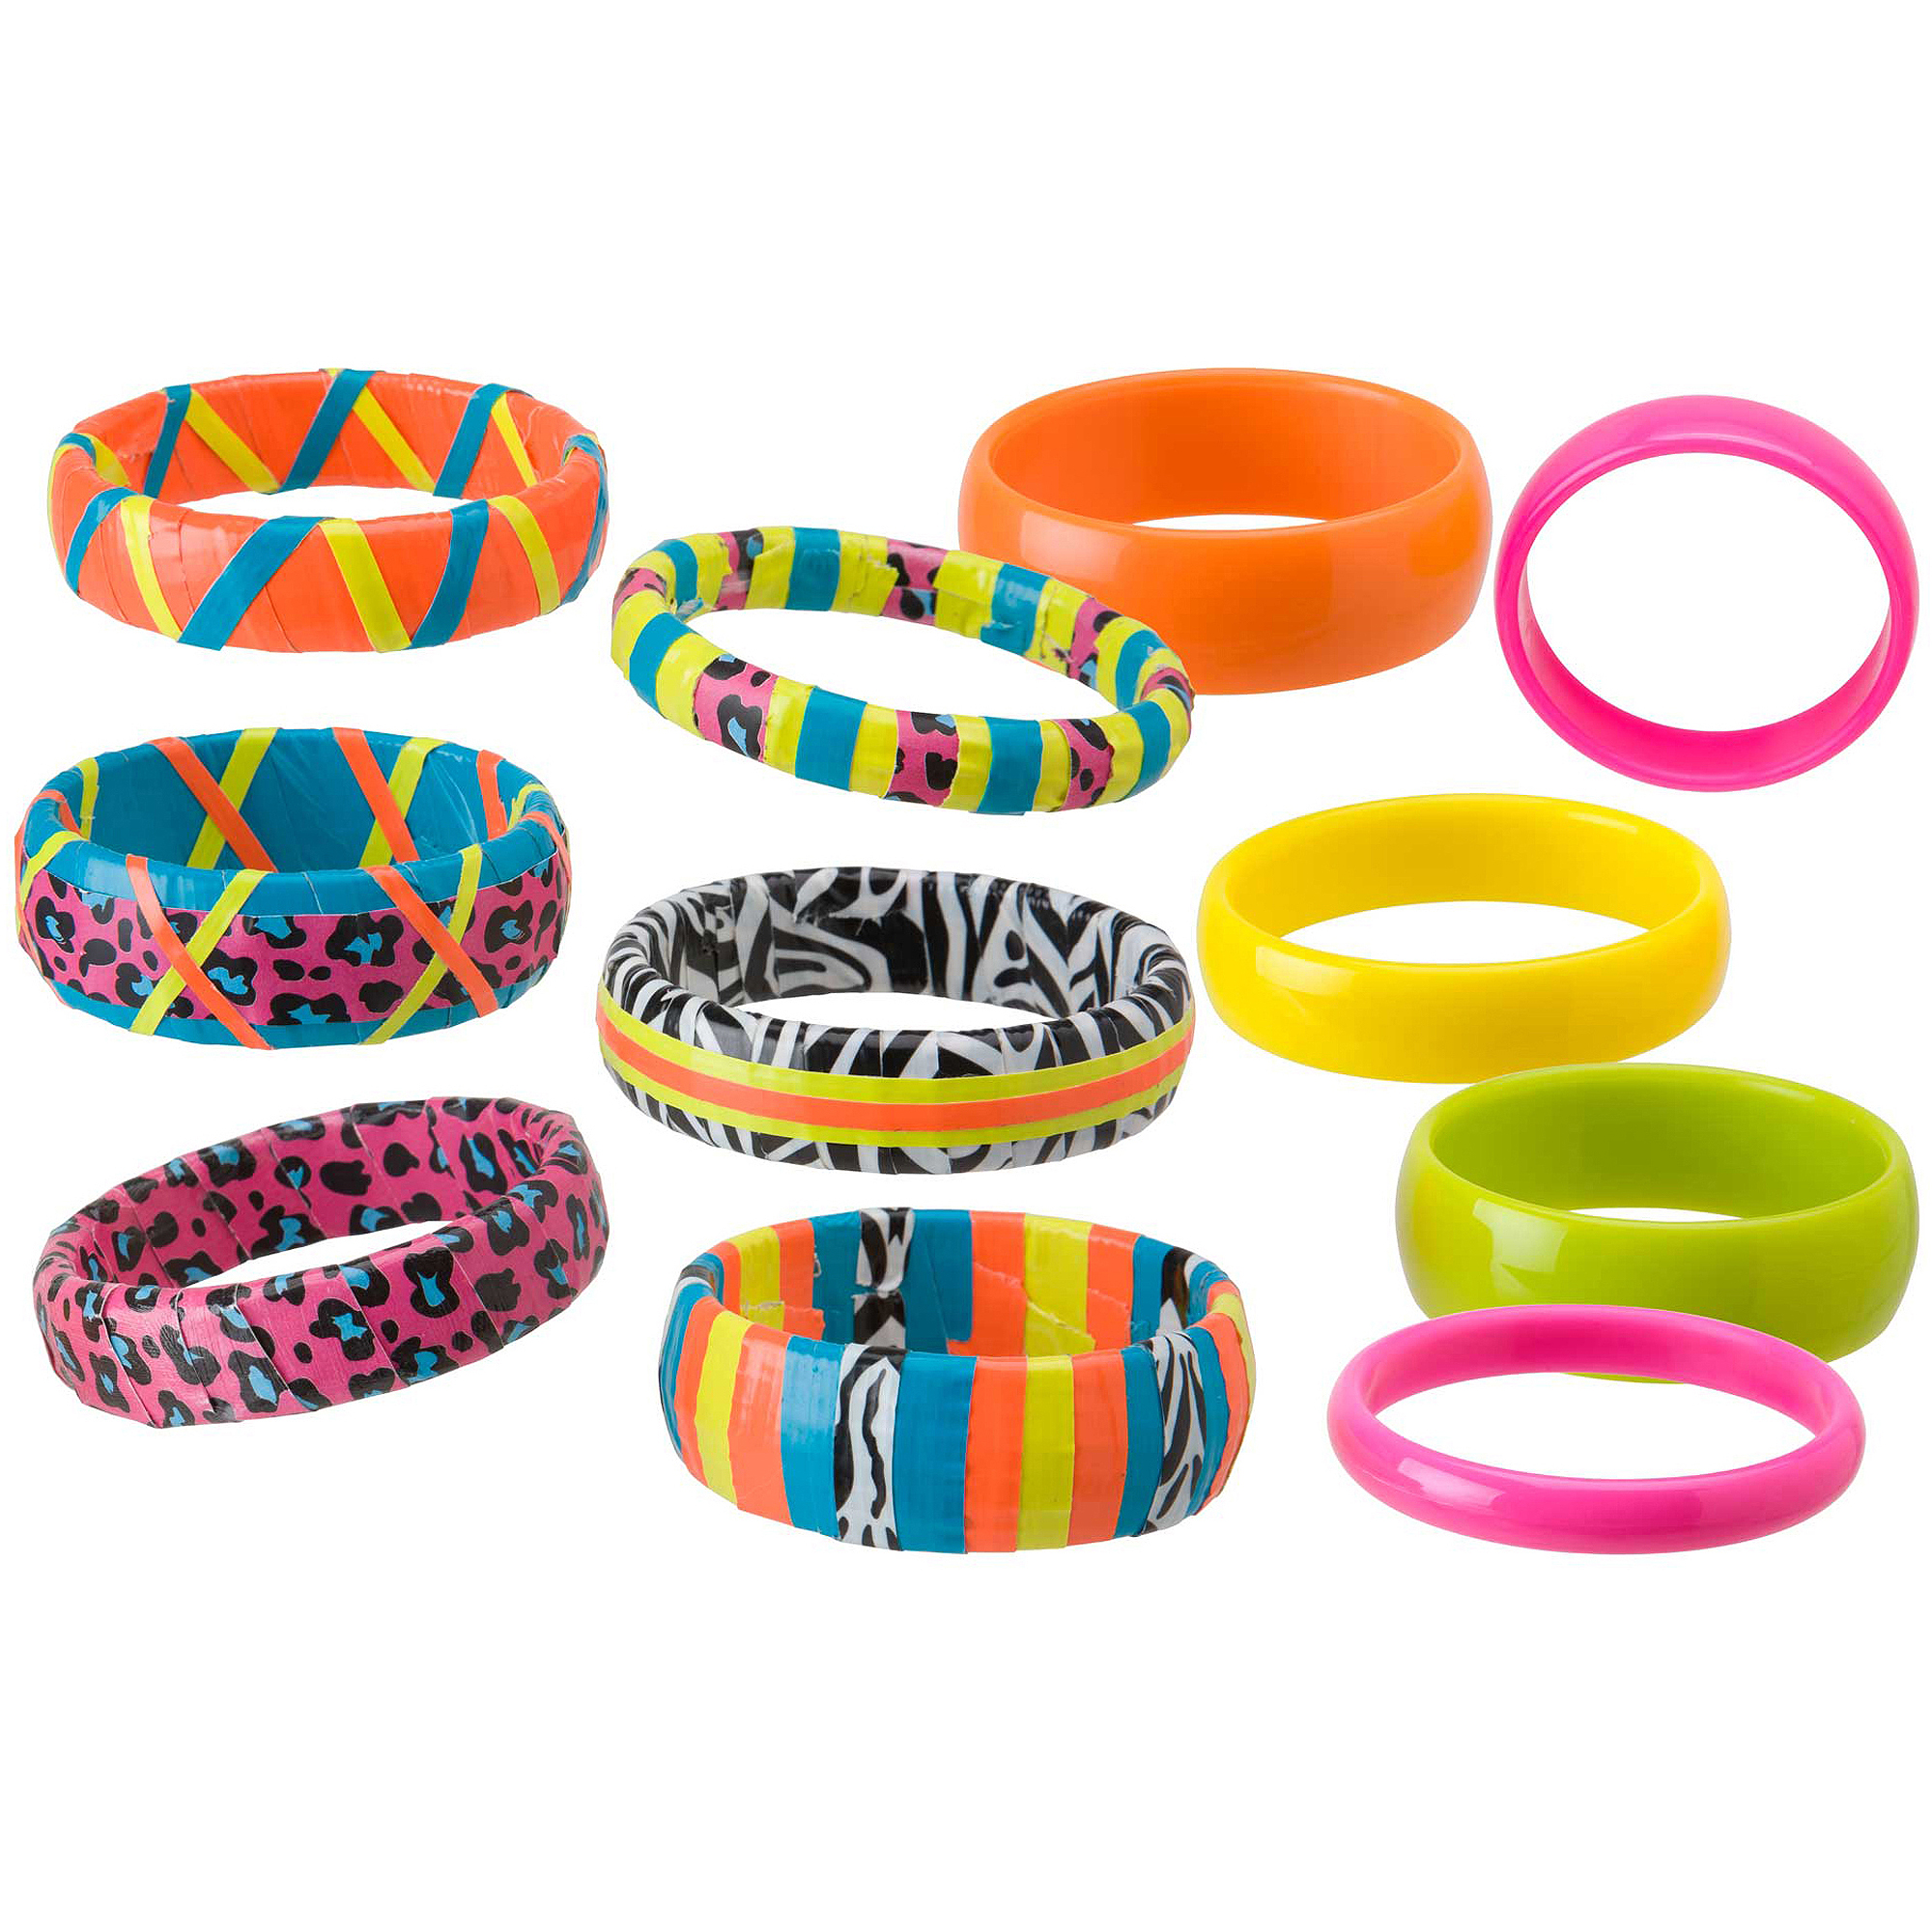 ALEX Toys Craft Duct Tape Bangles - image 1 of 5